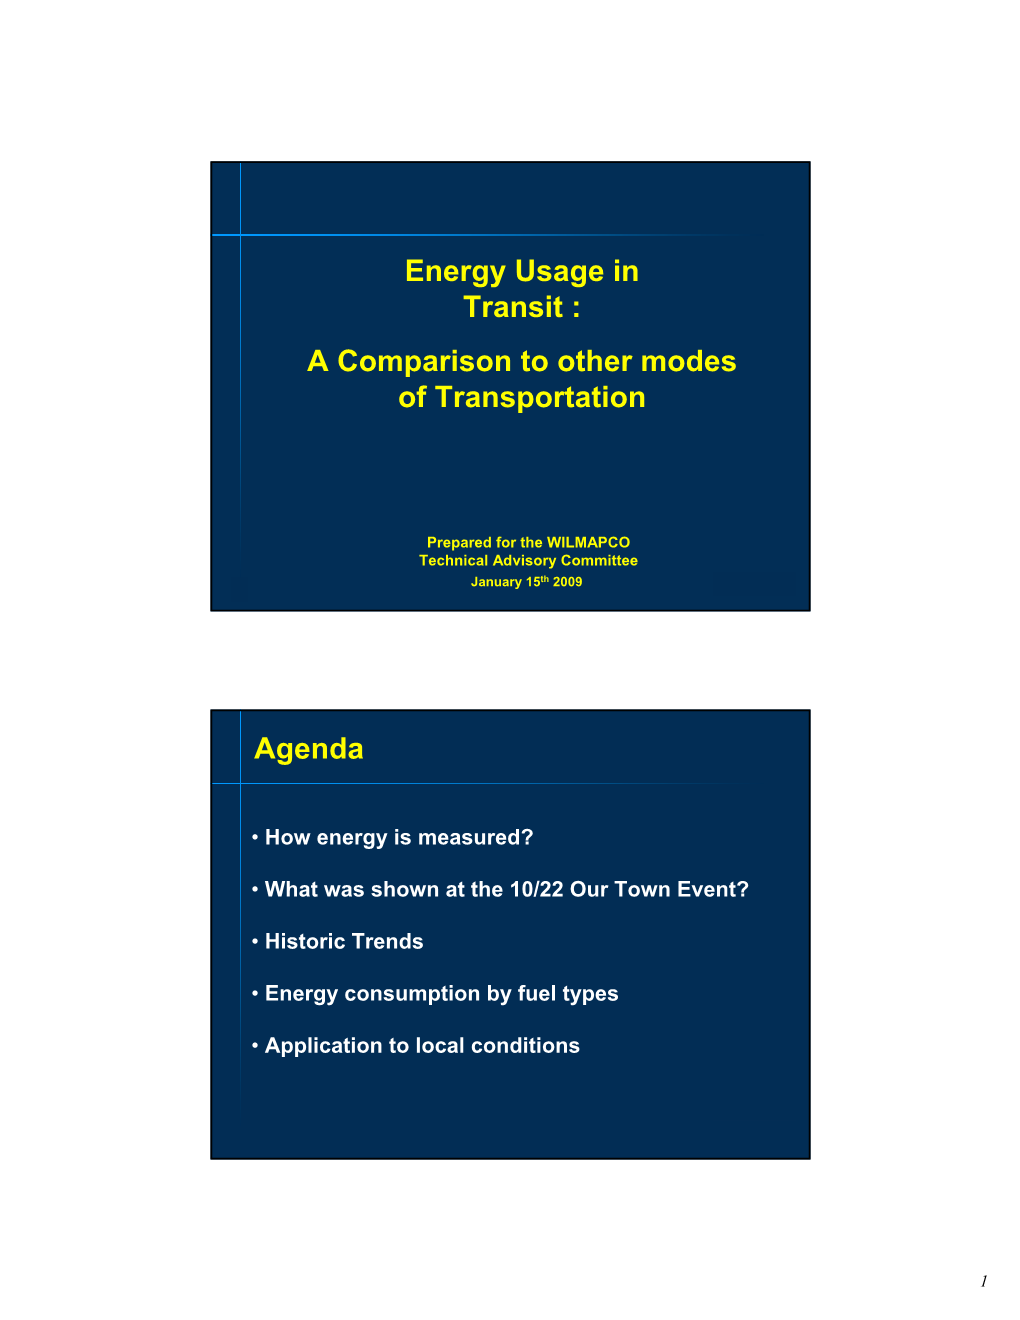 Energy Usage in Transit : a Comparison to Other Modes of Transportation